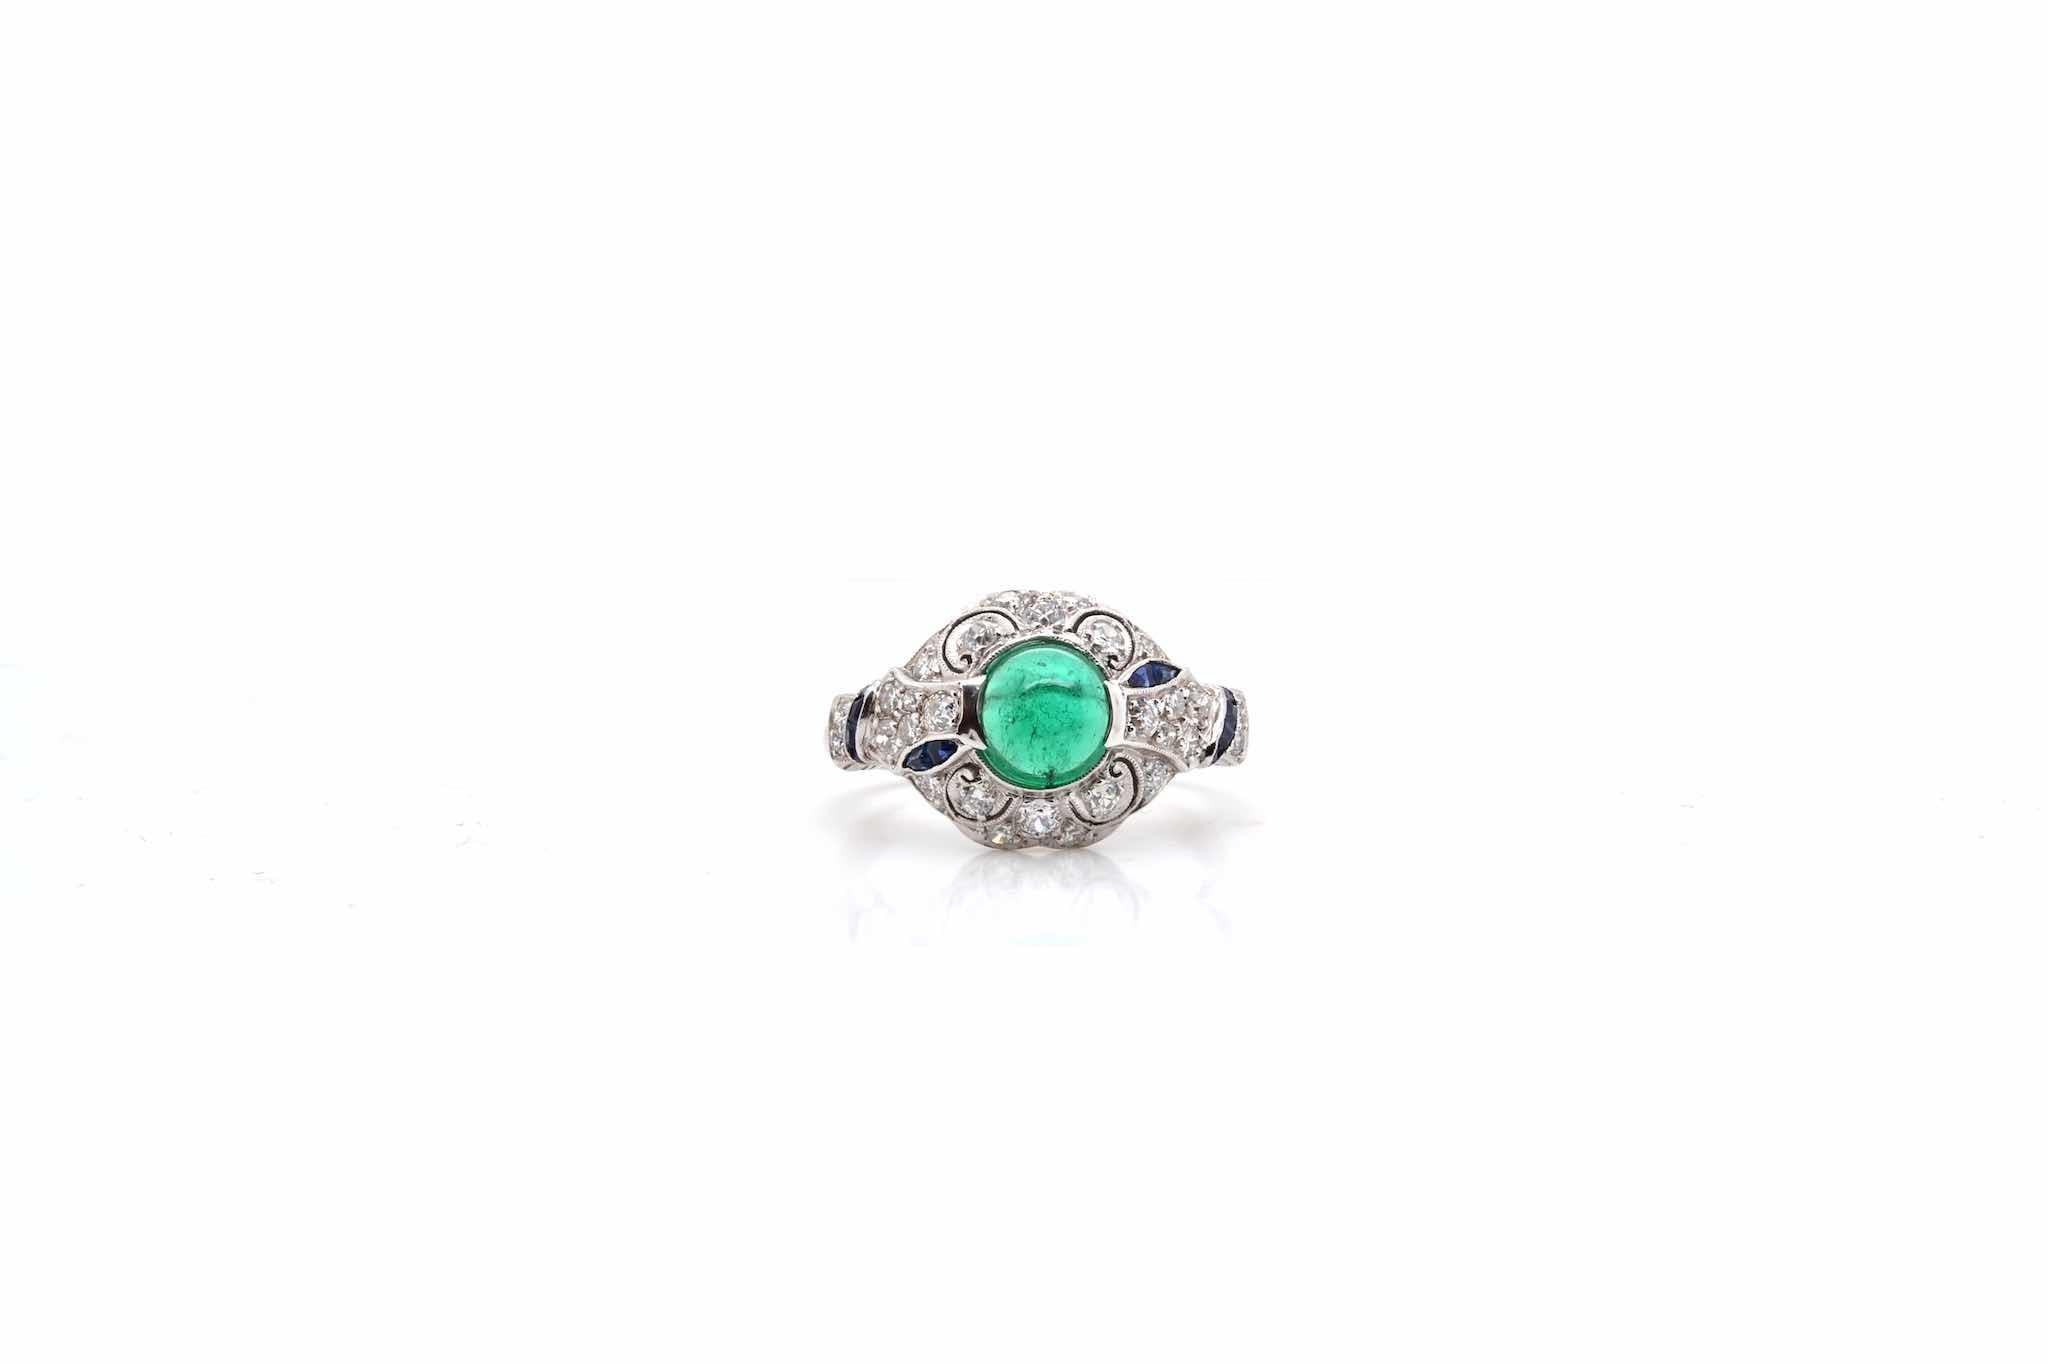 Stones: Cabochon emerald, brilliant cut diamonds
for a total weight of 0.20 carat and calibrated sapphires.
Material: Platinum
Weight: 6.2g
Dimensions: 12 mm length on finger
Size: 55 (free sizing)
Certificate
Ref. : 22709